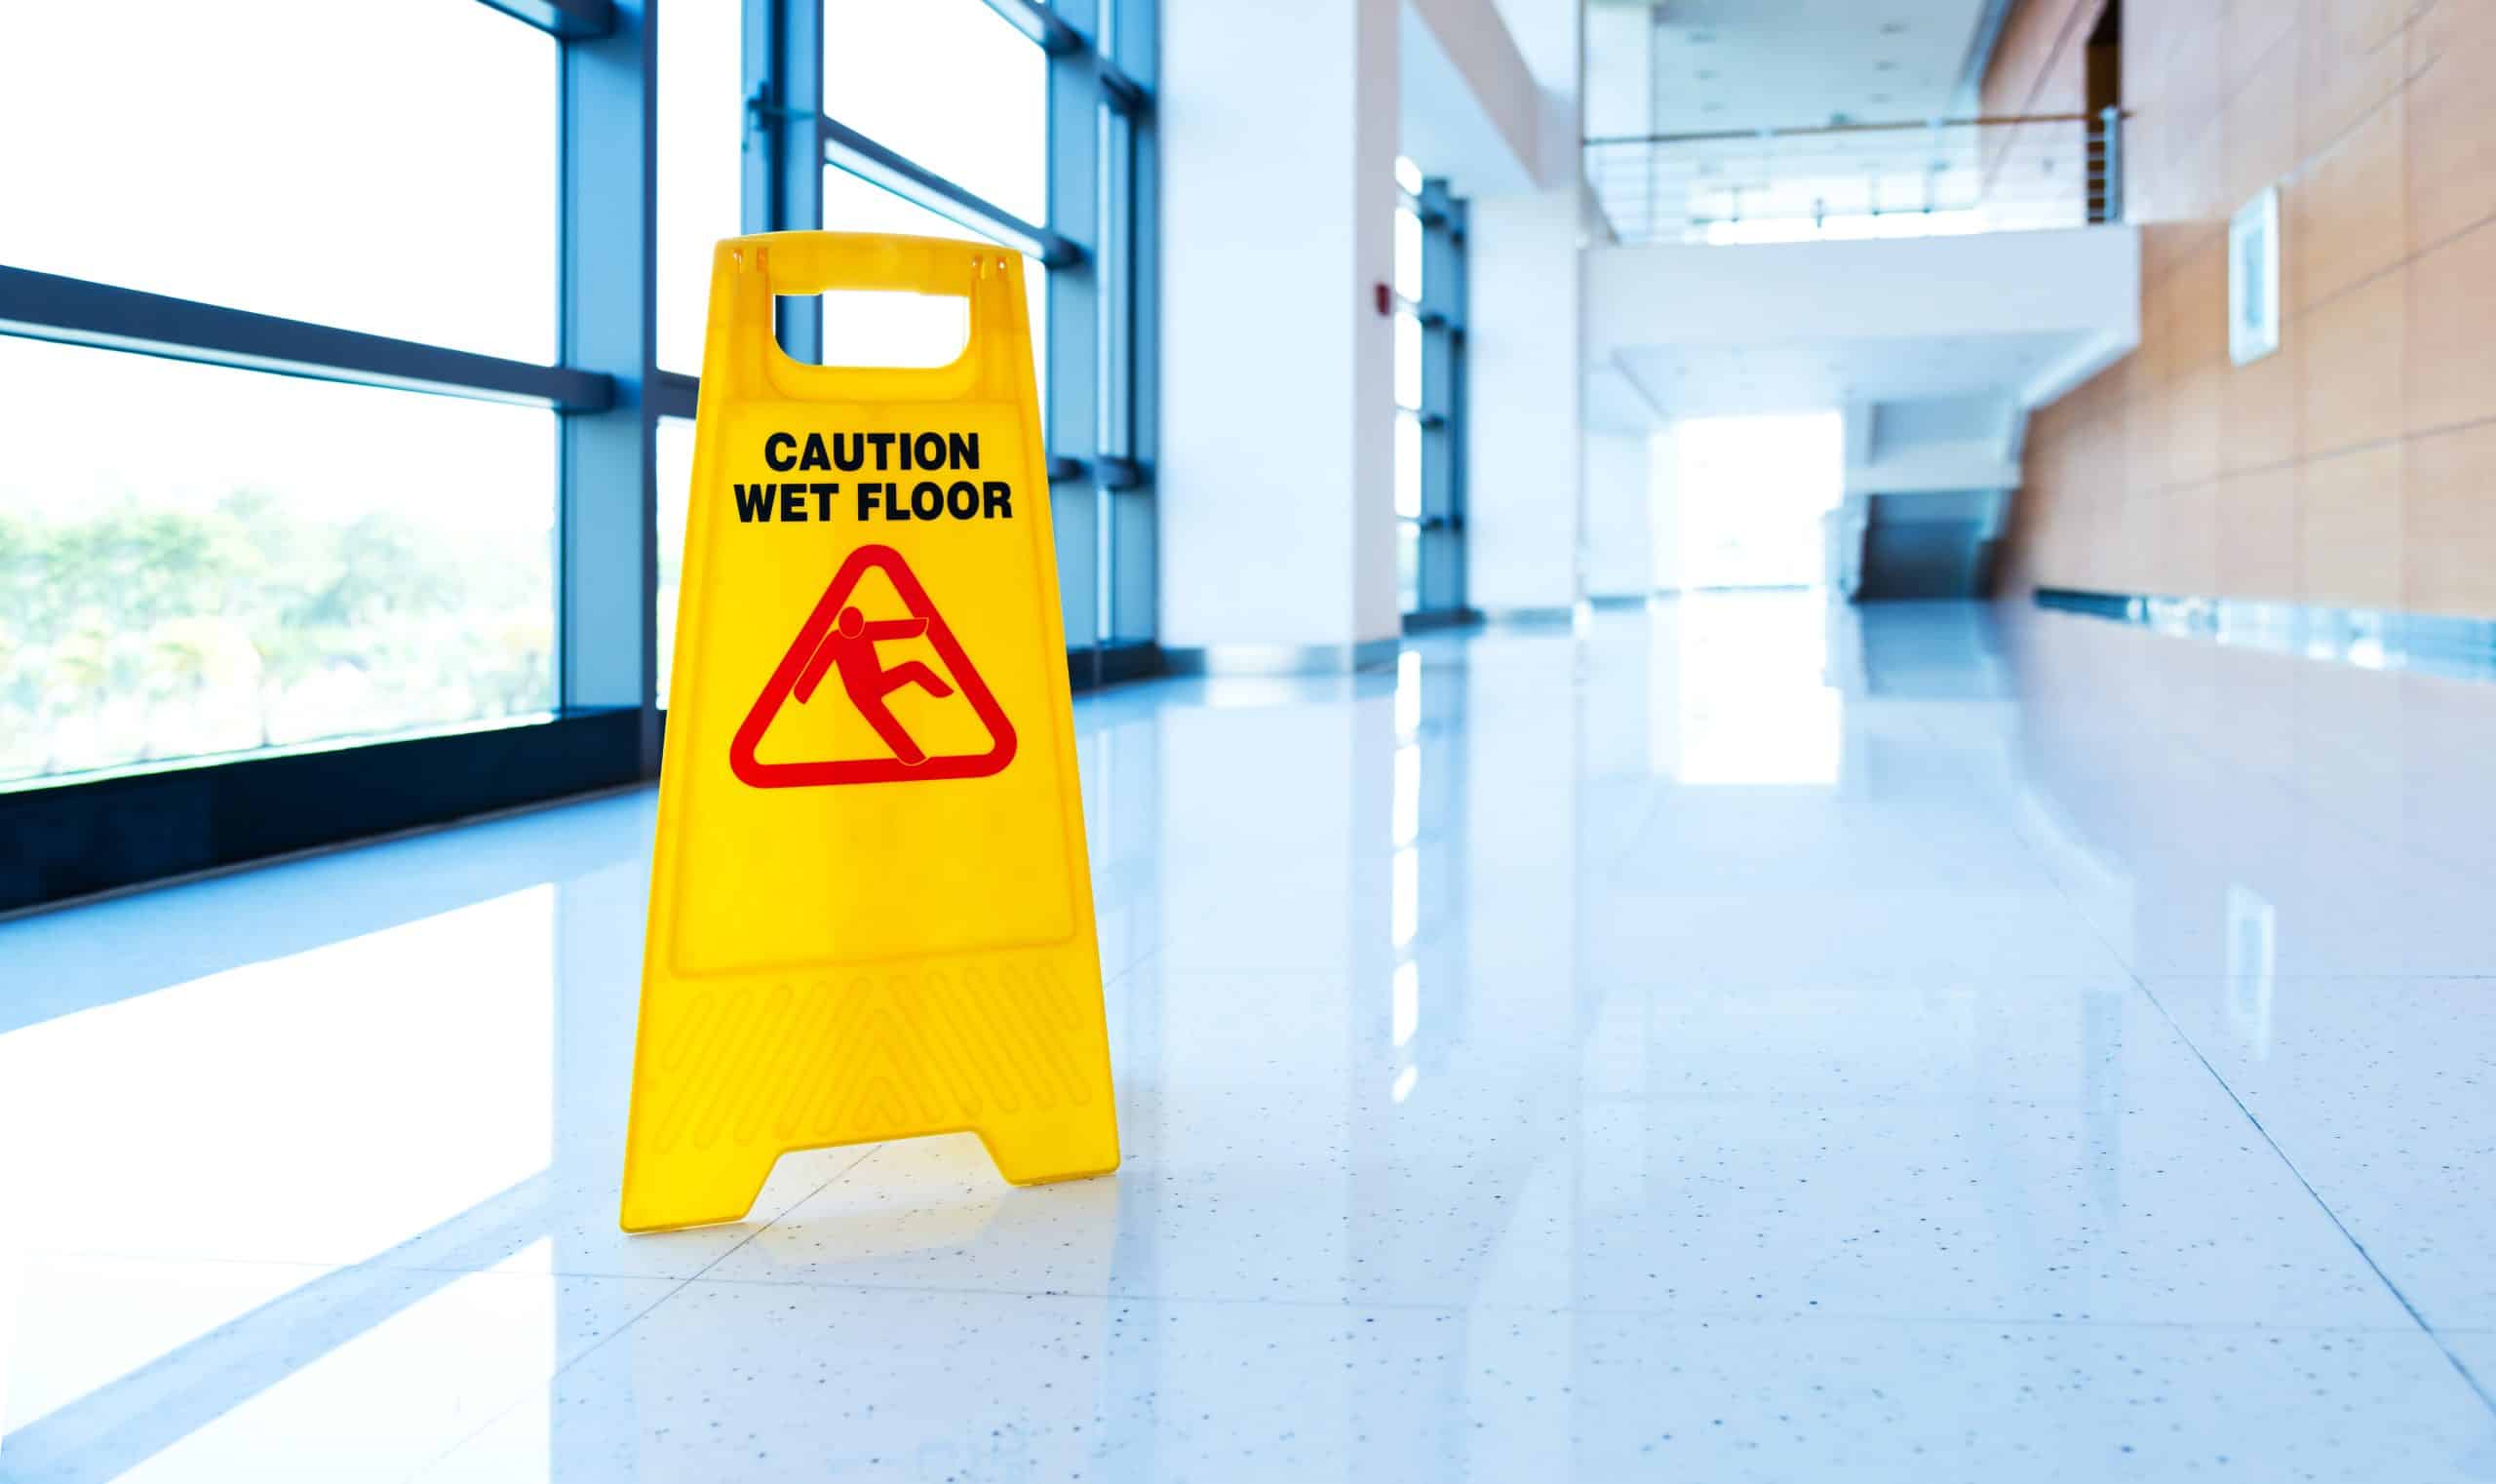 wet floor sign warning of slip and fall accident potential